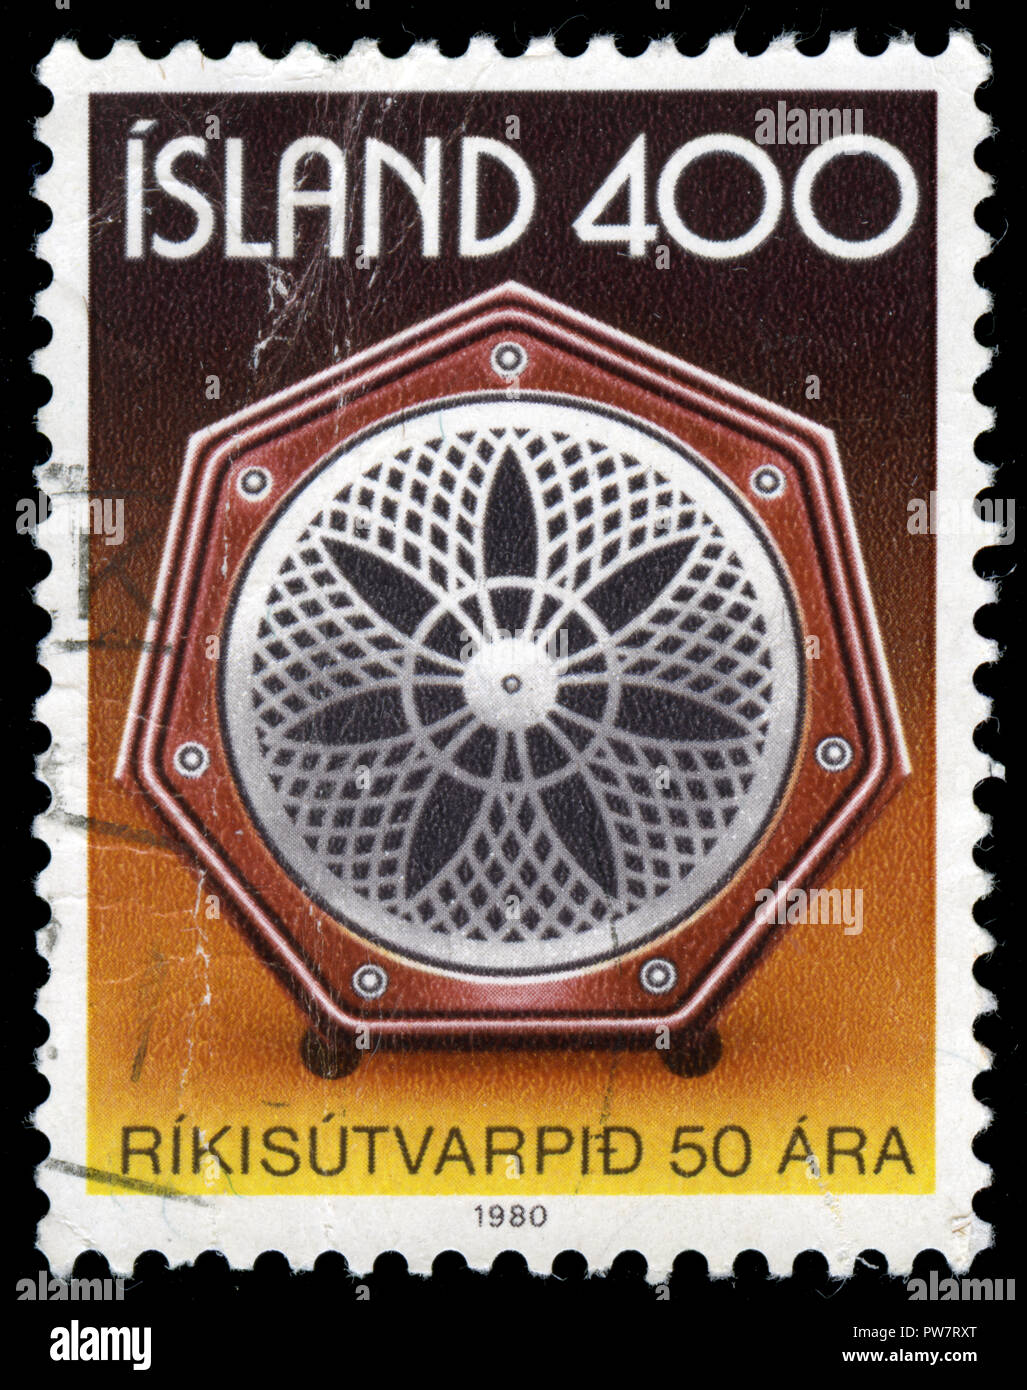 Postmarked stamp from Iceland issued in 1980 Stock Photo